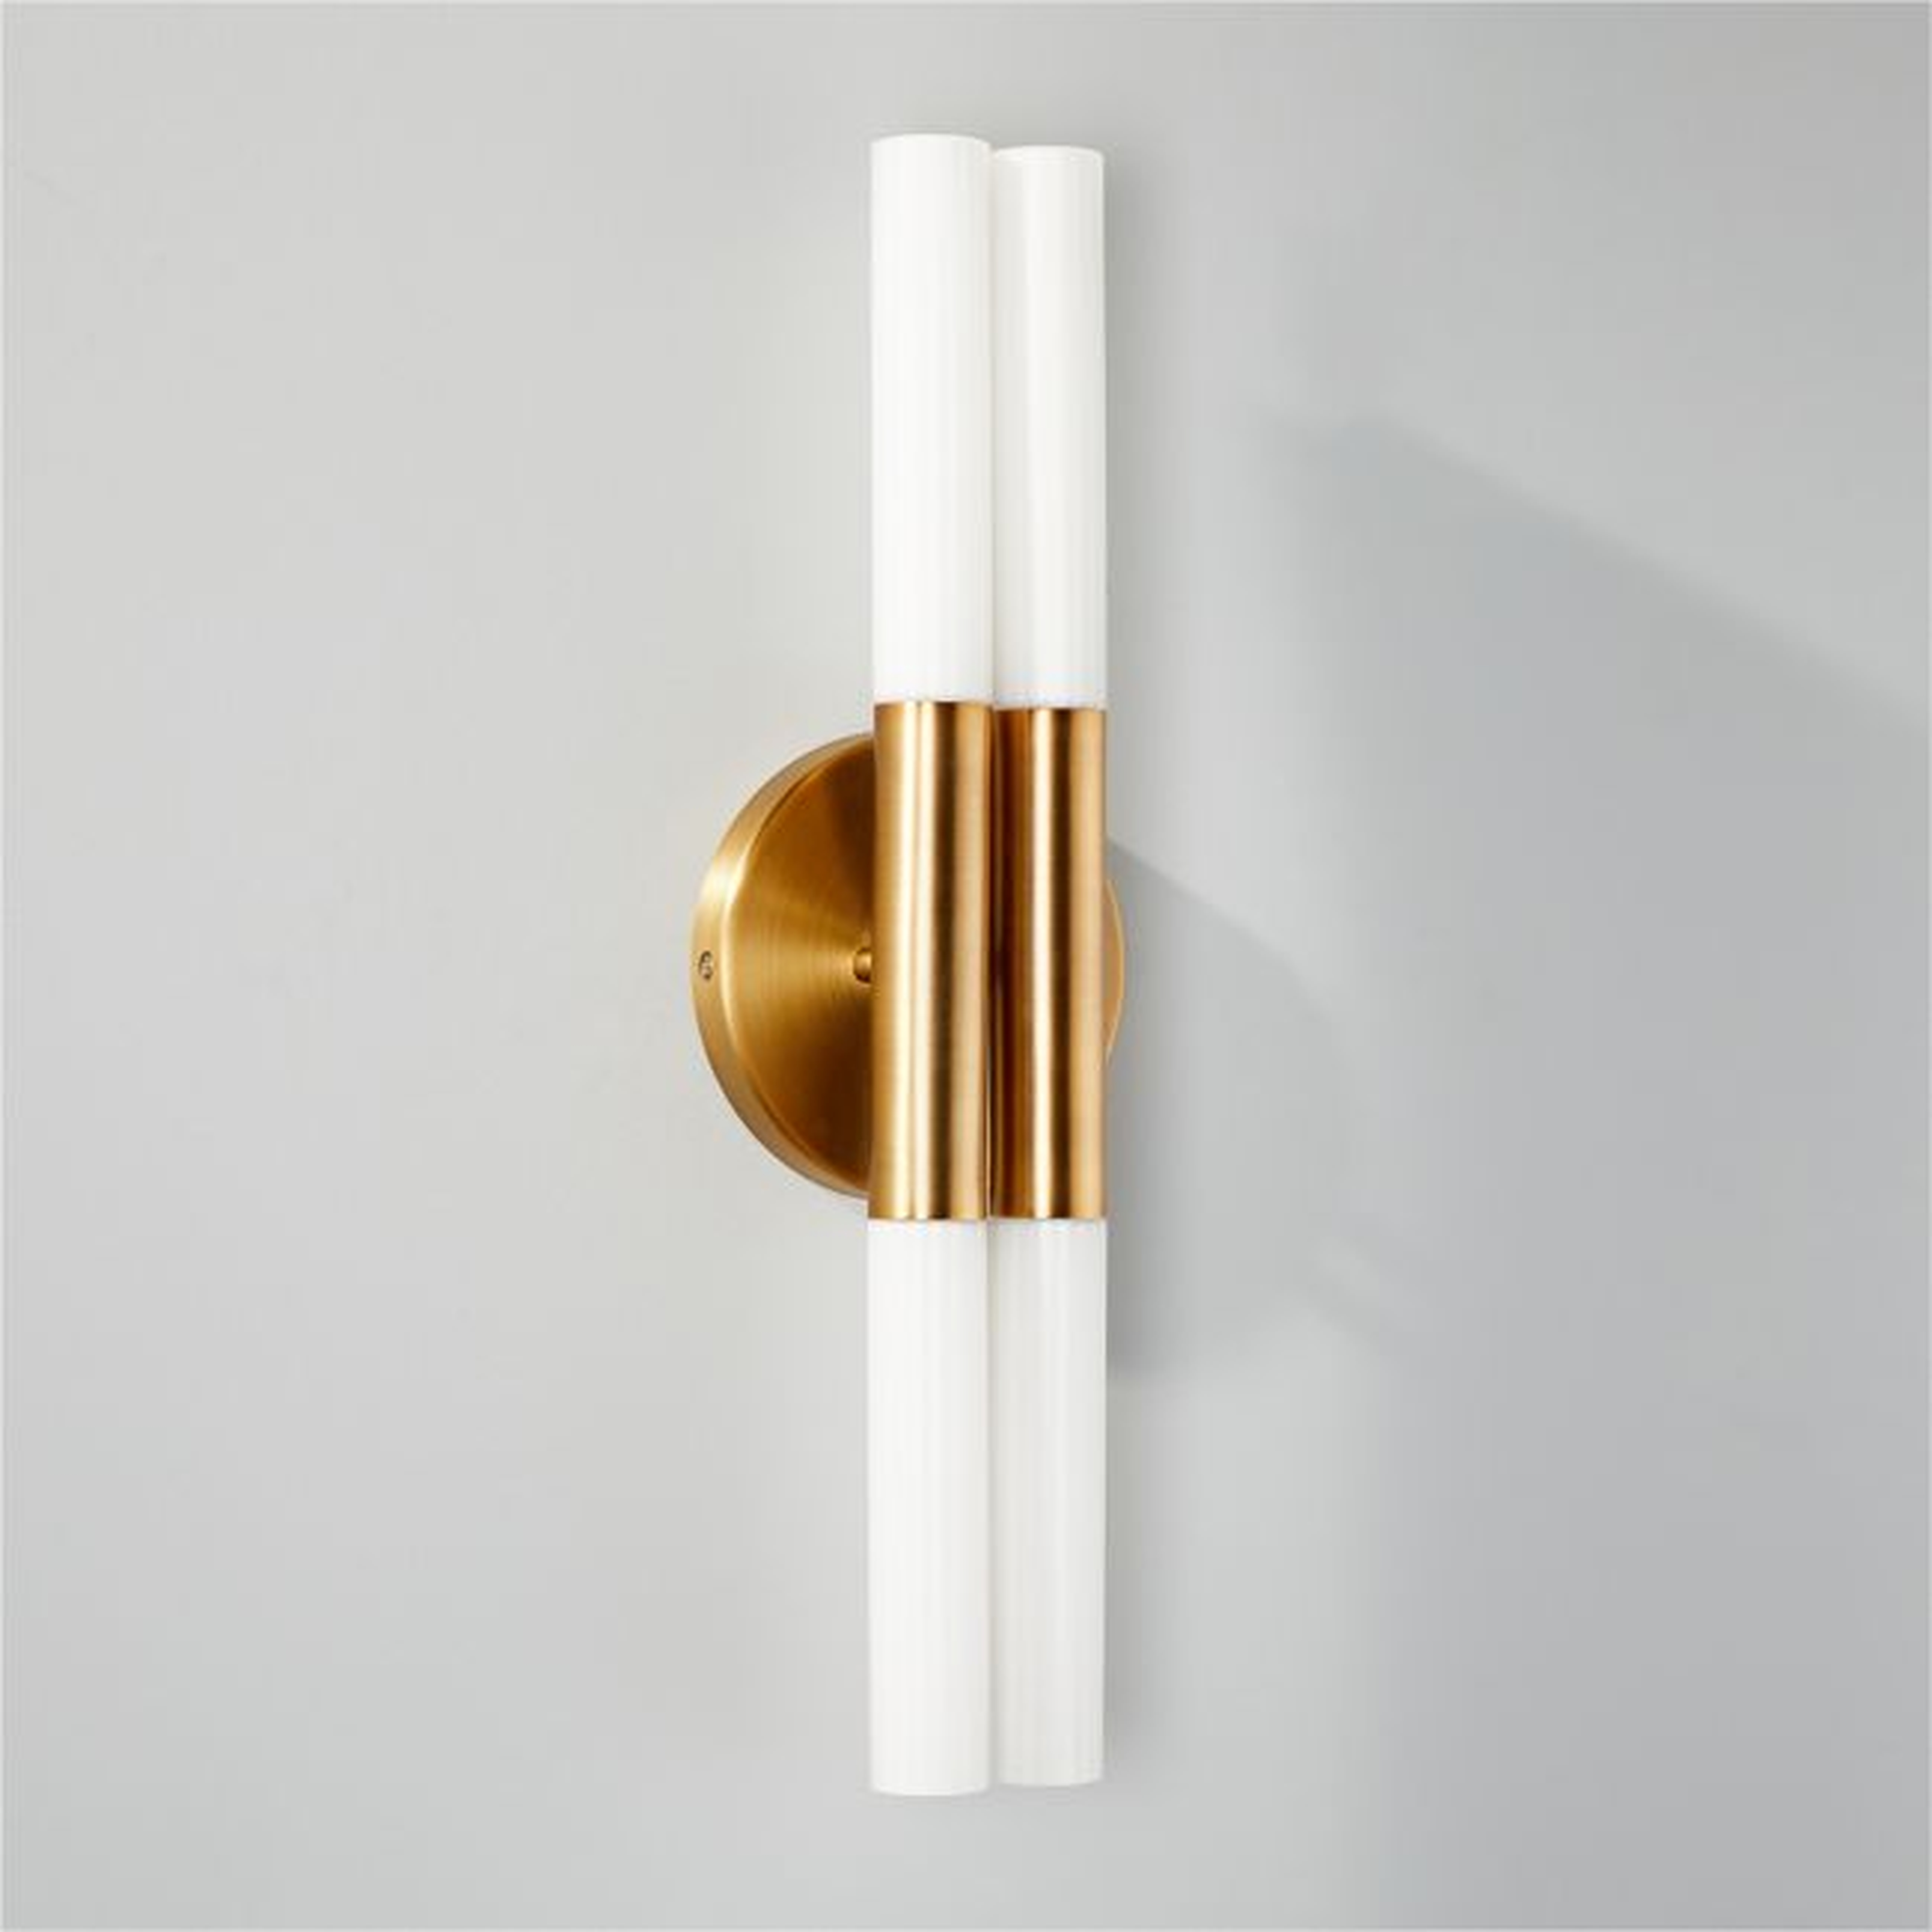 Bella Fluted Brass Wall Sconce RESTOCK Mid March 2021 - CB2